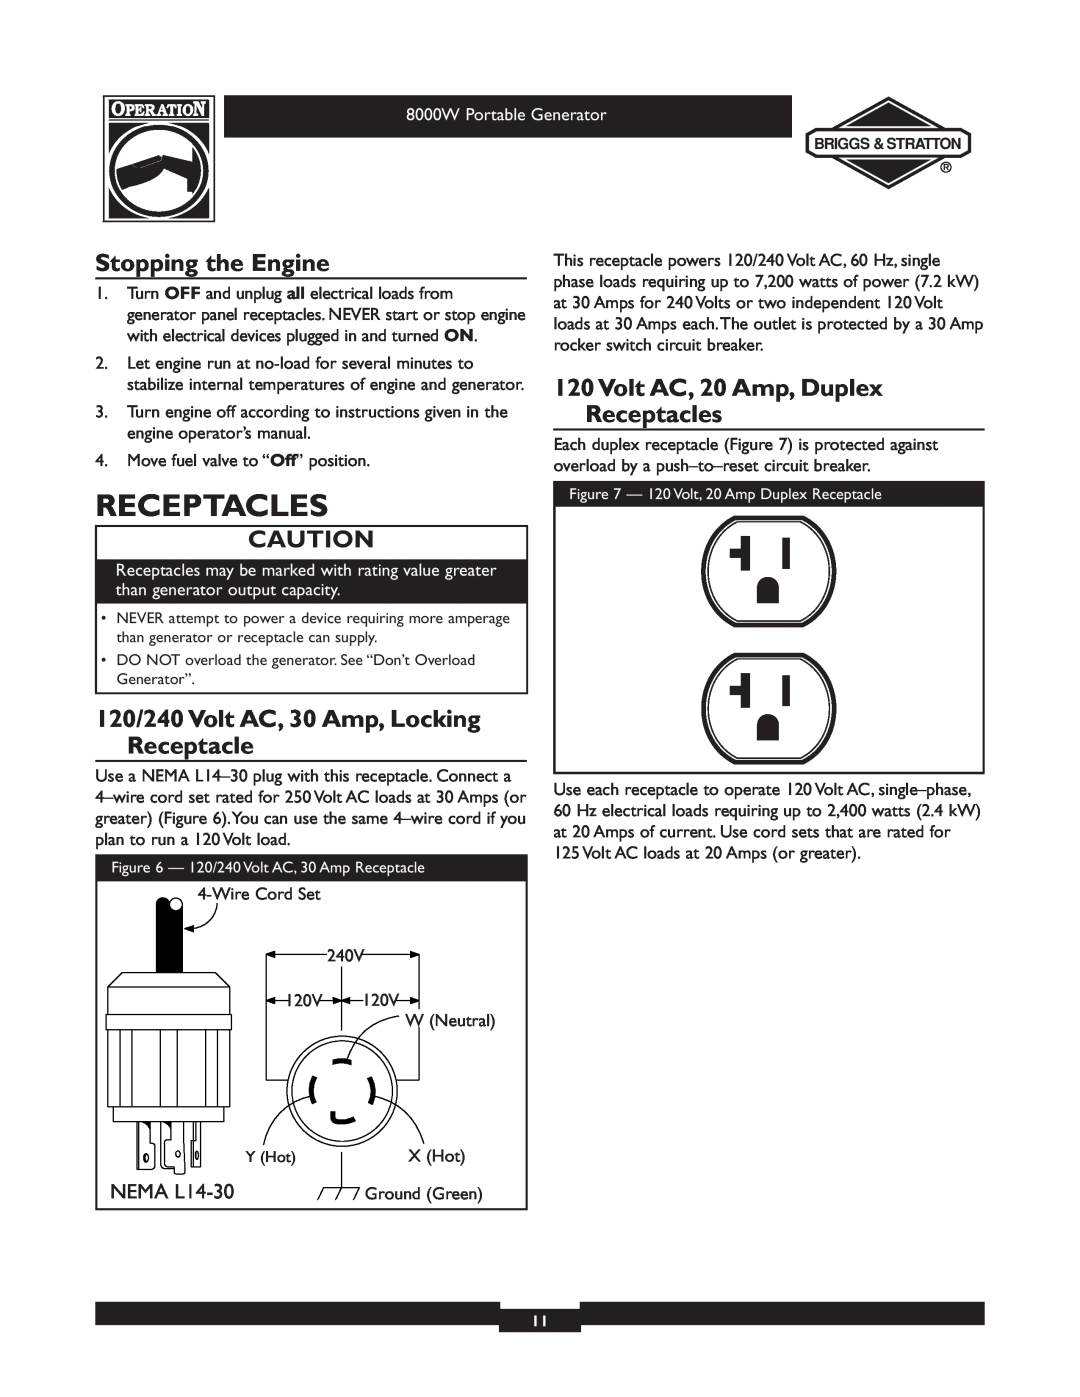 Briggs & Stratton 030210-2 Receptacles, Stopping the Engine, 120/240 Volt AC, 30 Amp, Locking Receptacle, NEMA L14-30 